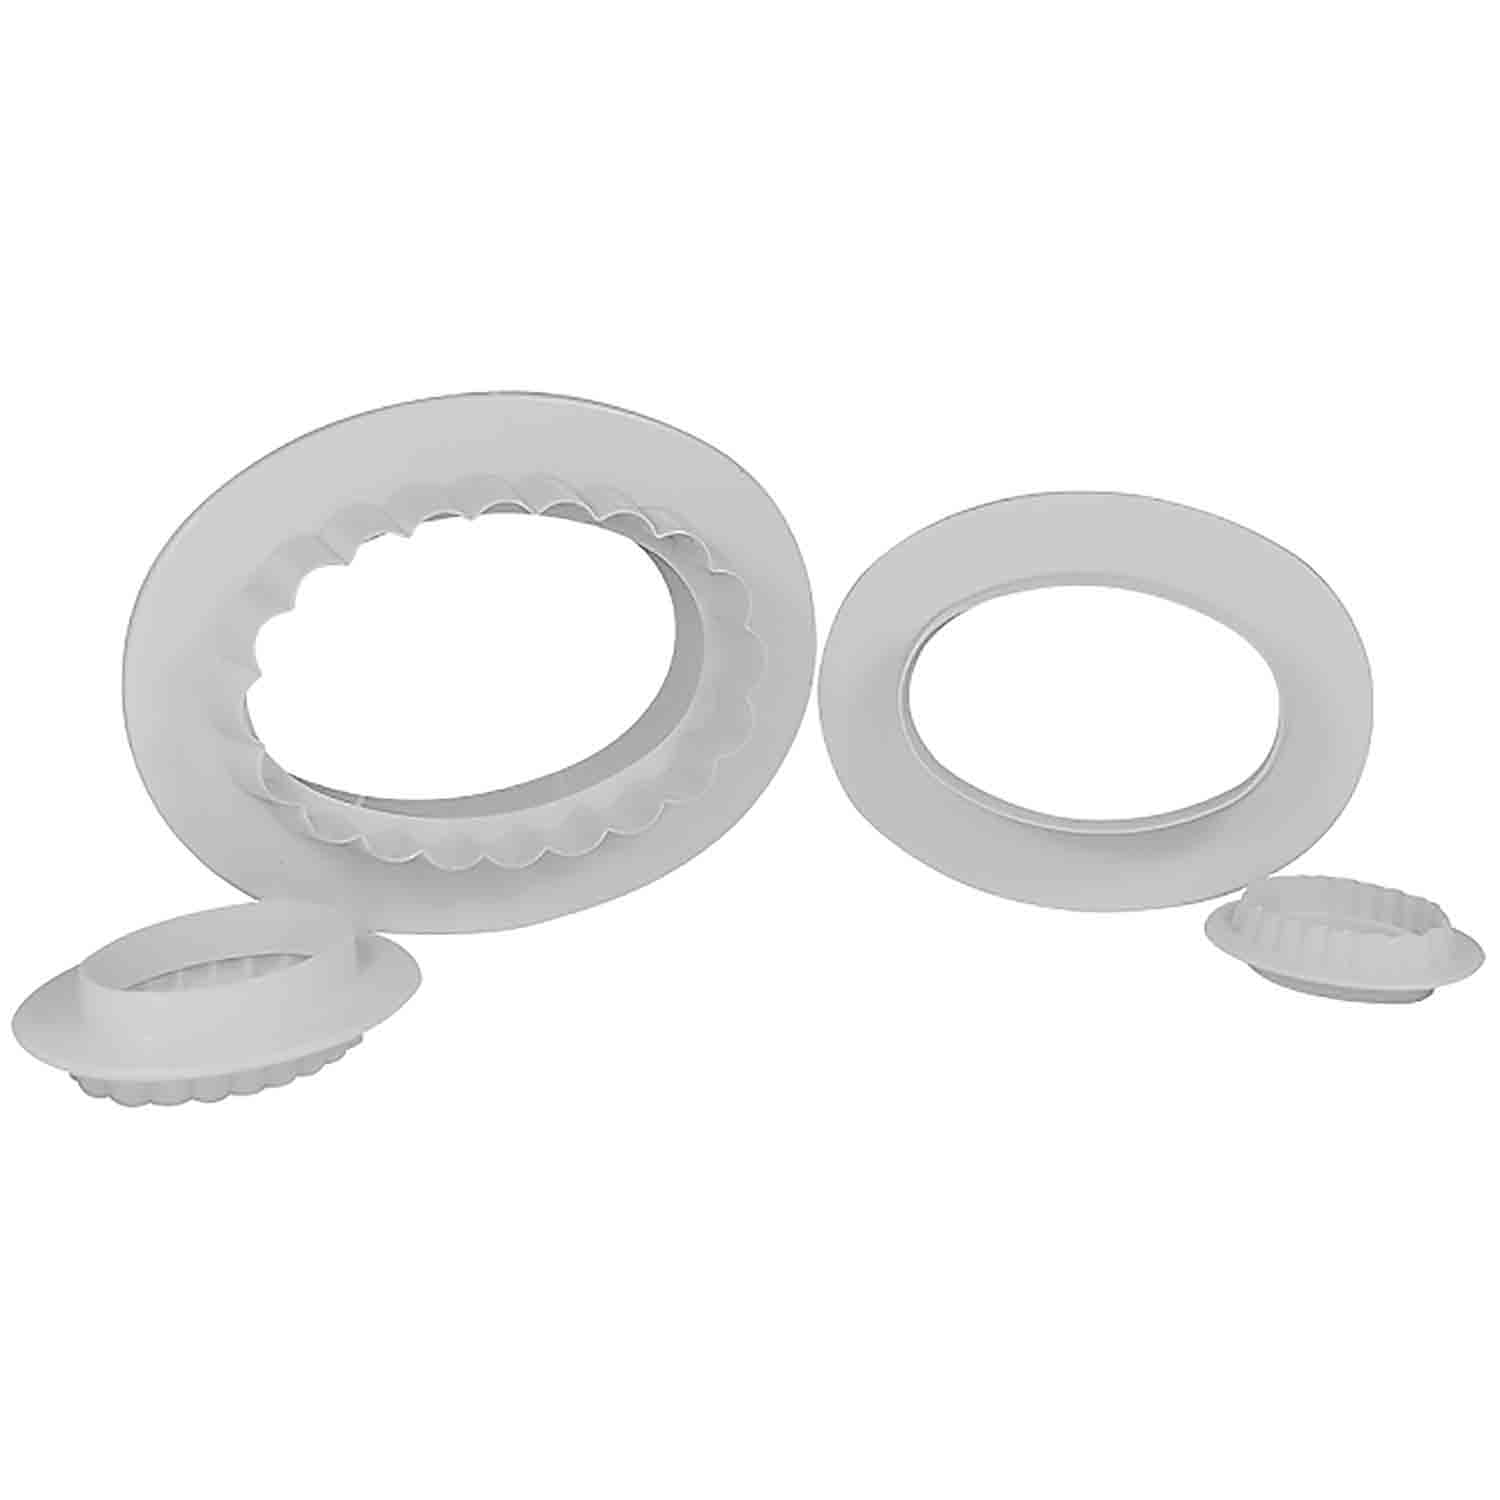 Oval Double Sided Cutter Set